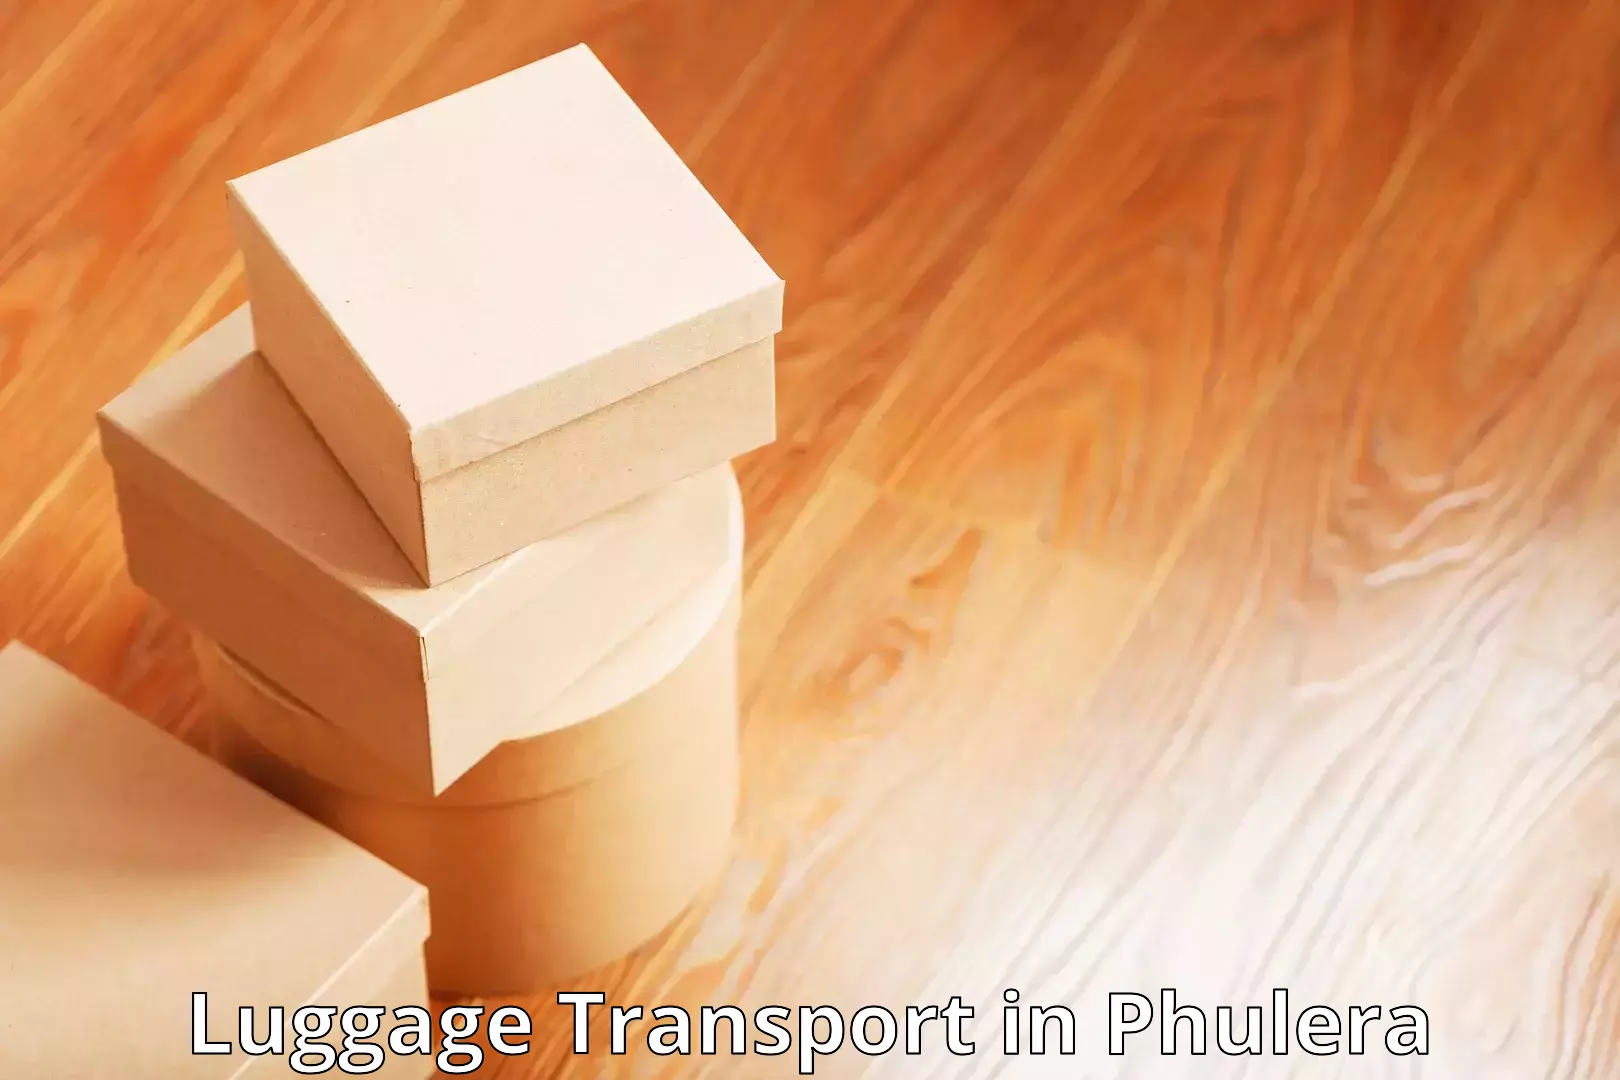 Luggage transport solutions in Phulera